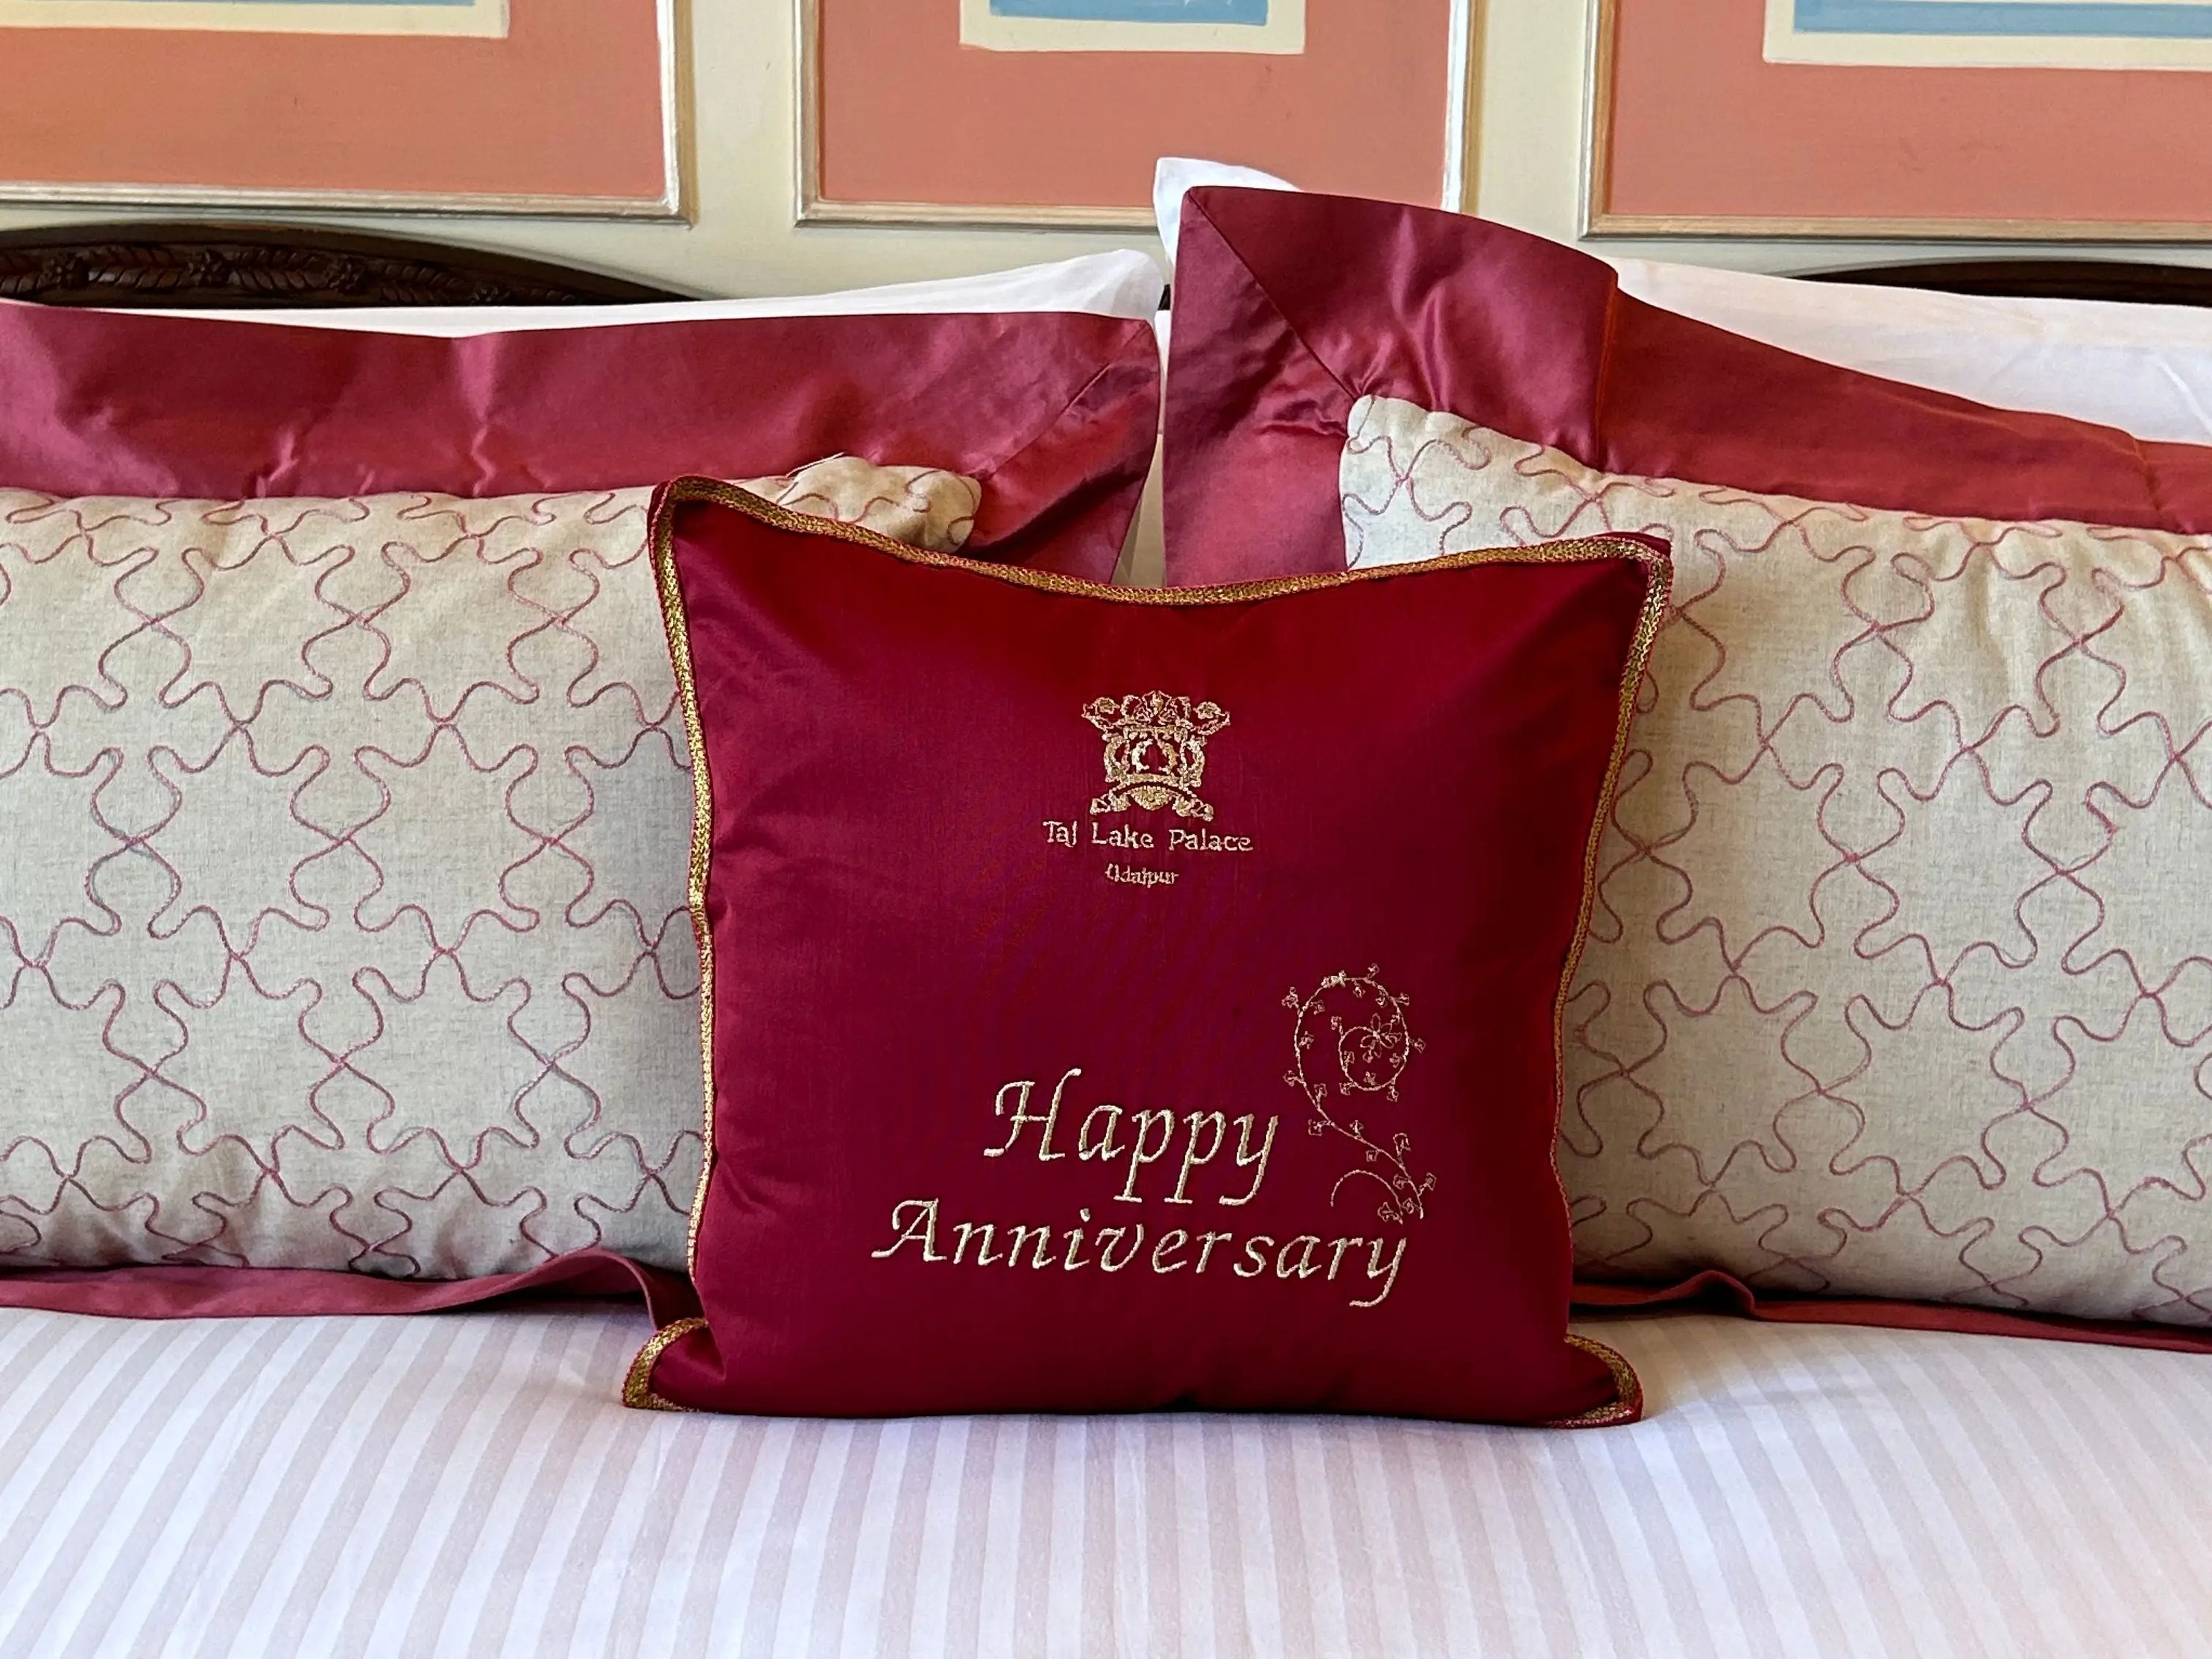 A bed with gold and red pillows. The pillow at the front reads "Happy Anniversary."